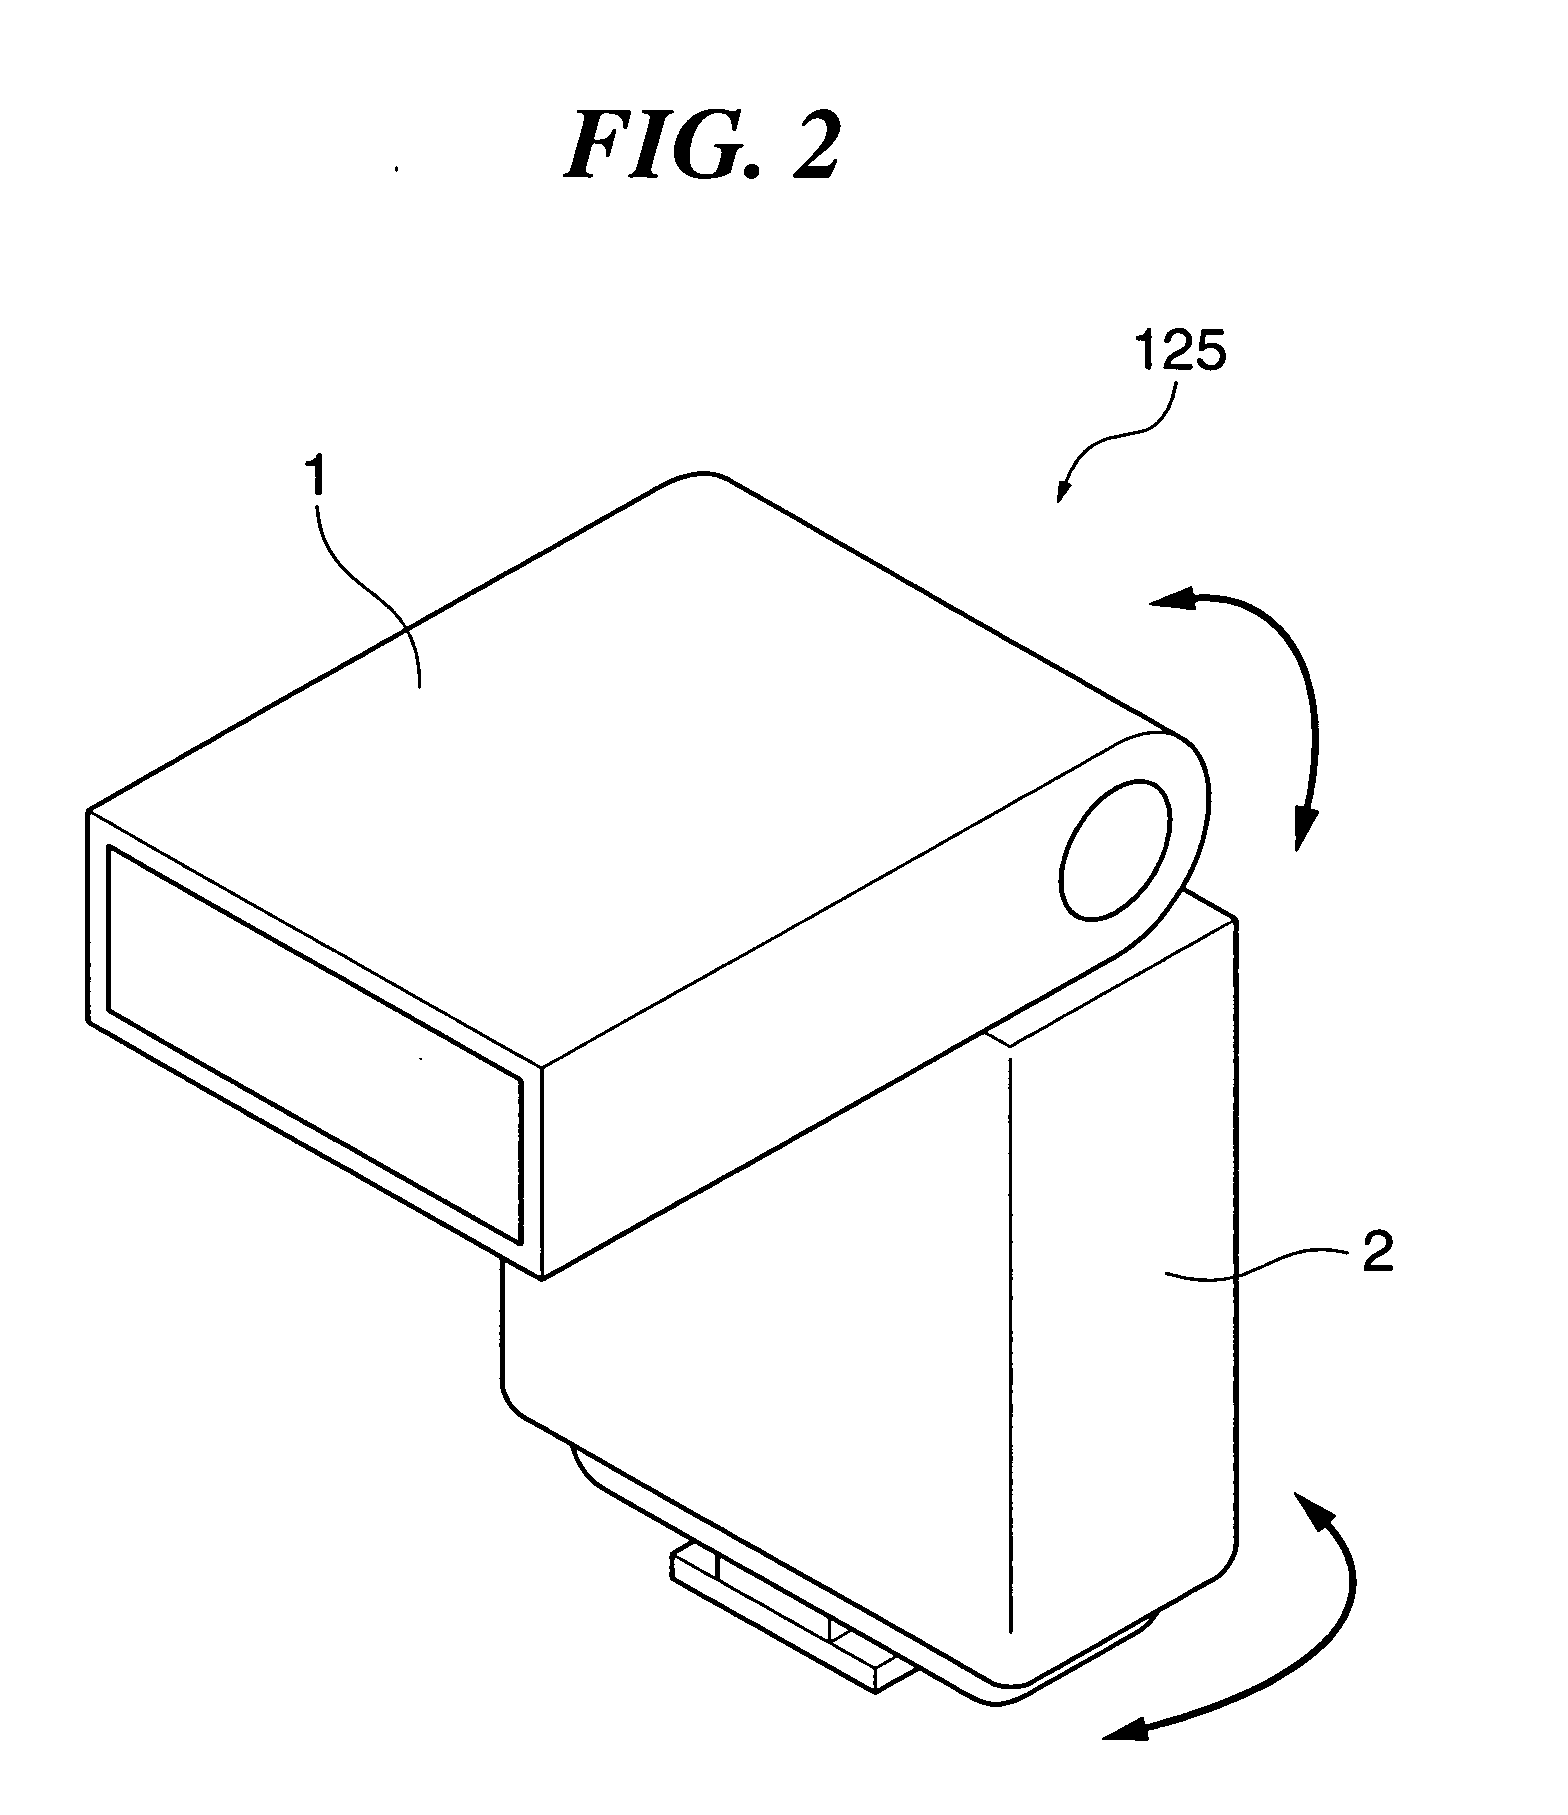 Image pickup apparatus, white balance adjustment method therefor, and program for implementing the method